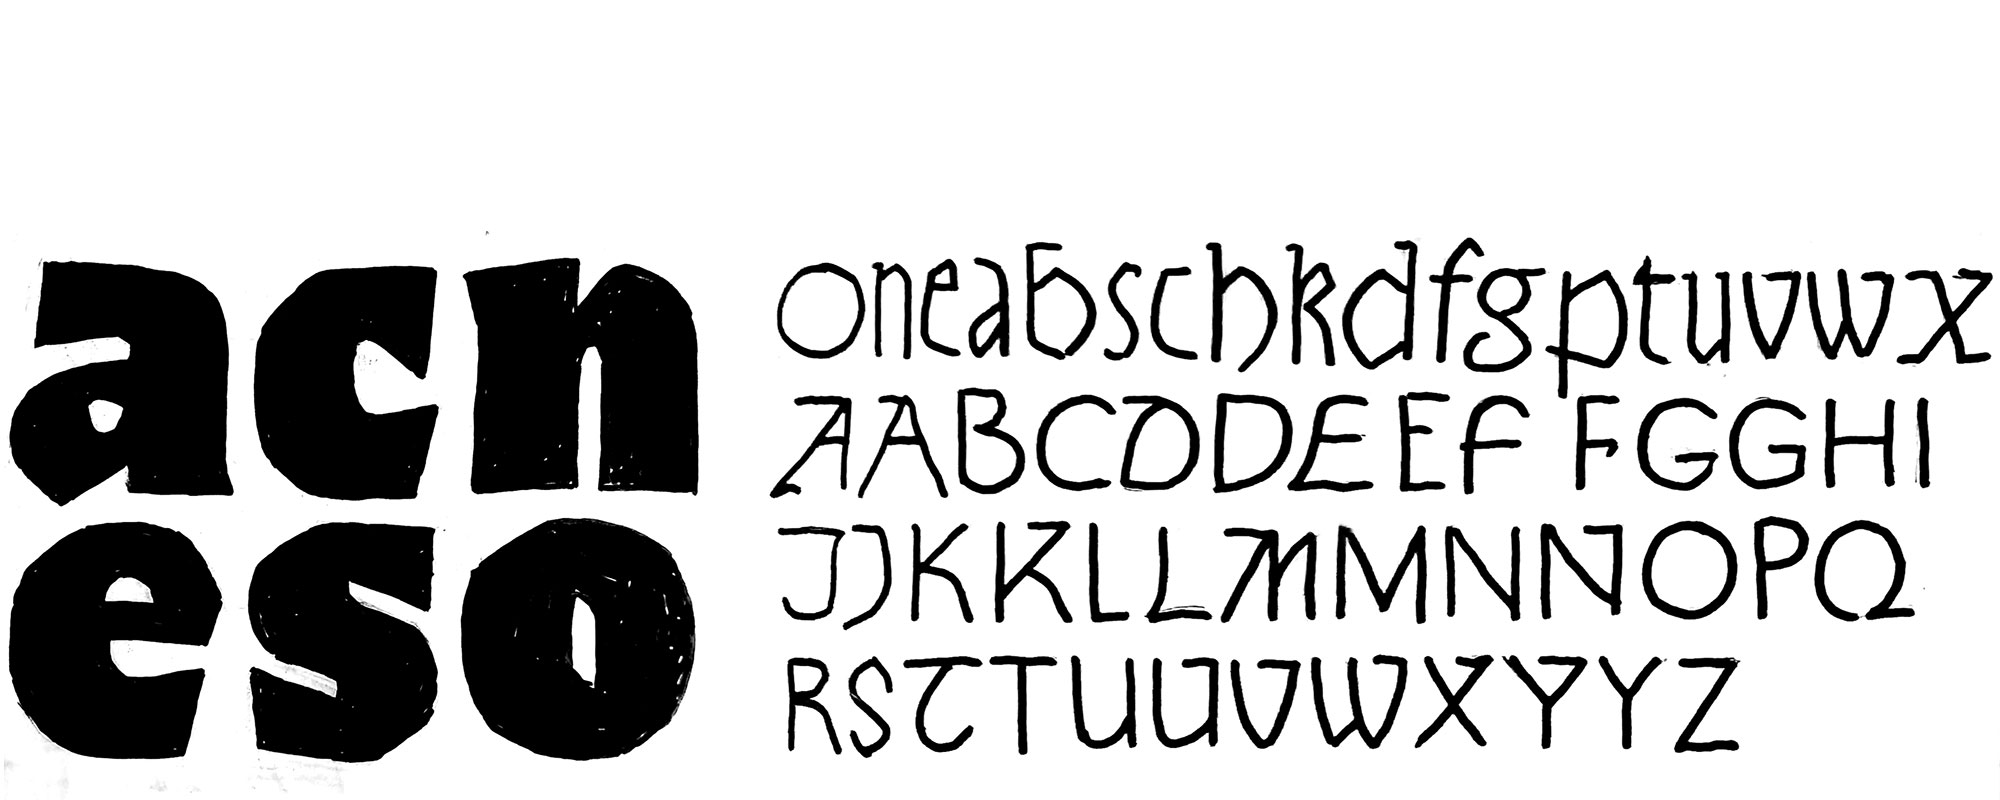 Manual type sketches of six very fat letters an a very thin alphabet